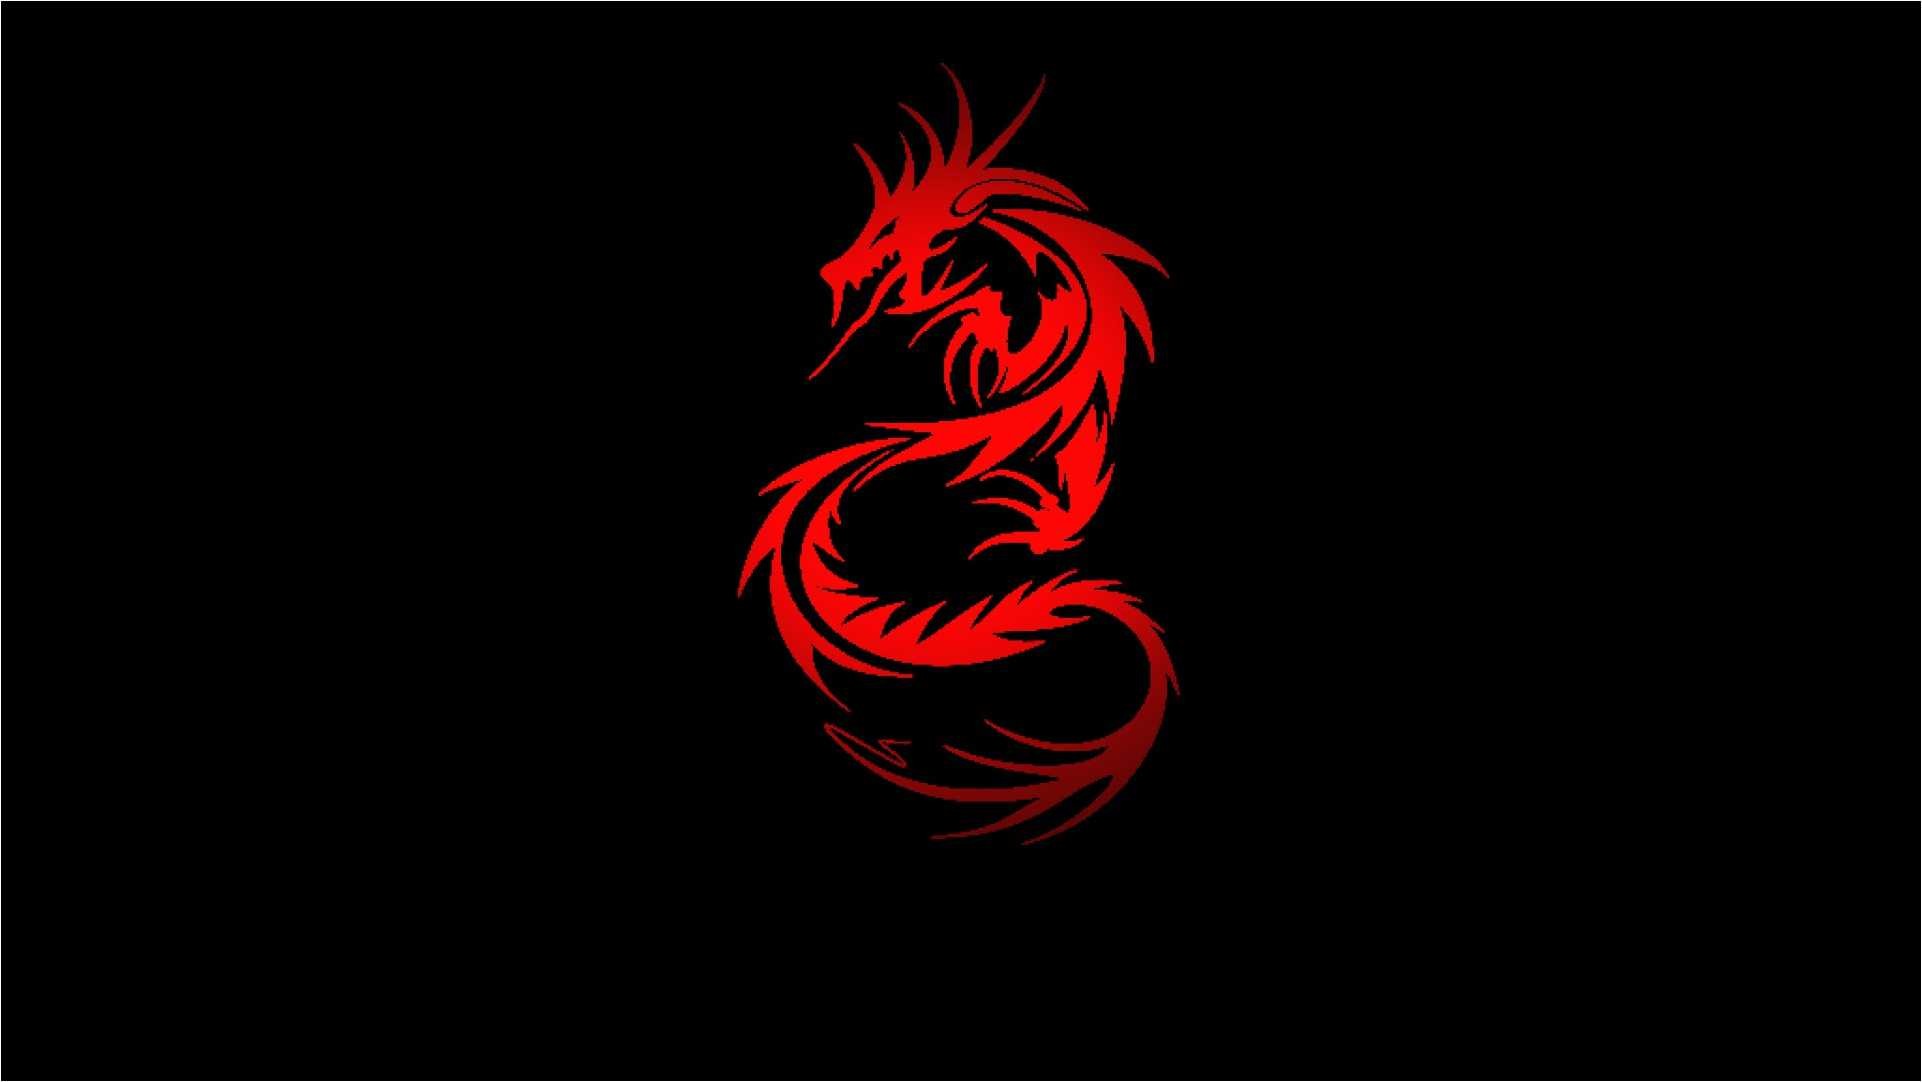 100+] Red Dragon Wallpapers | Wallpapers.com